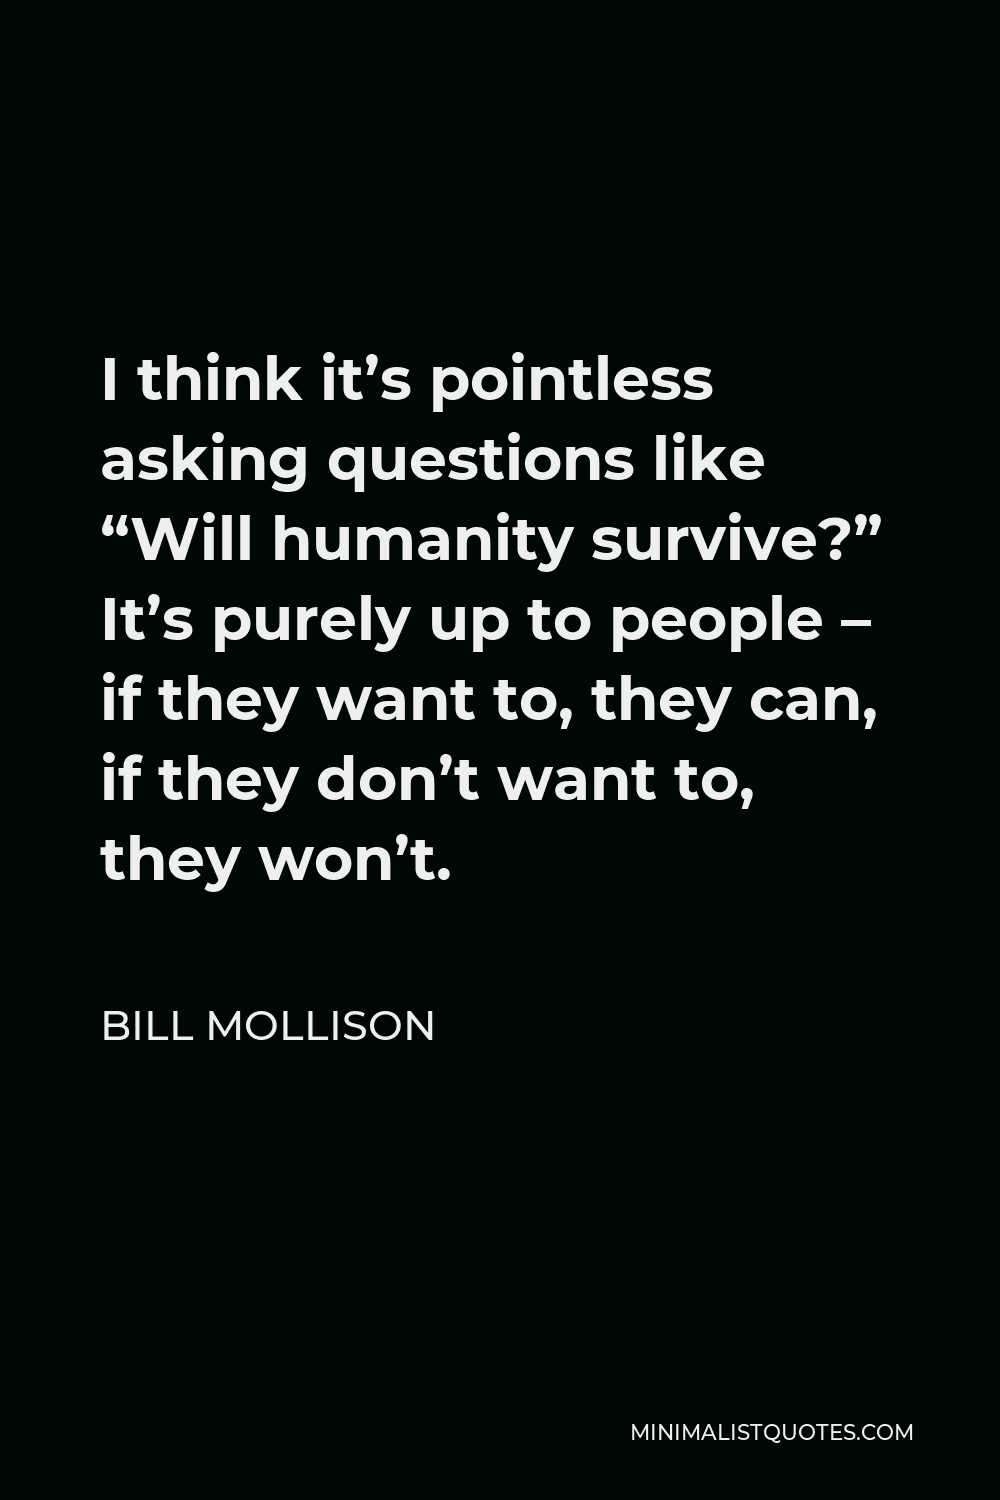 Bill Mollison Quote - I think it’s pointless asking questions like “Will humanity survive?” It’s purely up to people – if they want to, they can, if they don’t want to, they won’t.